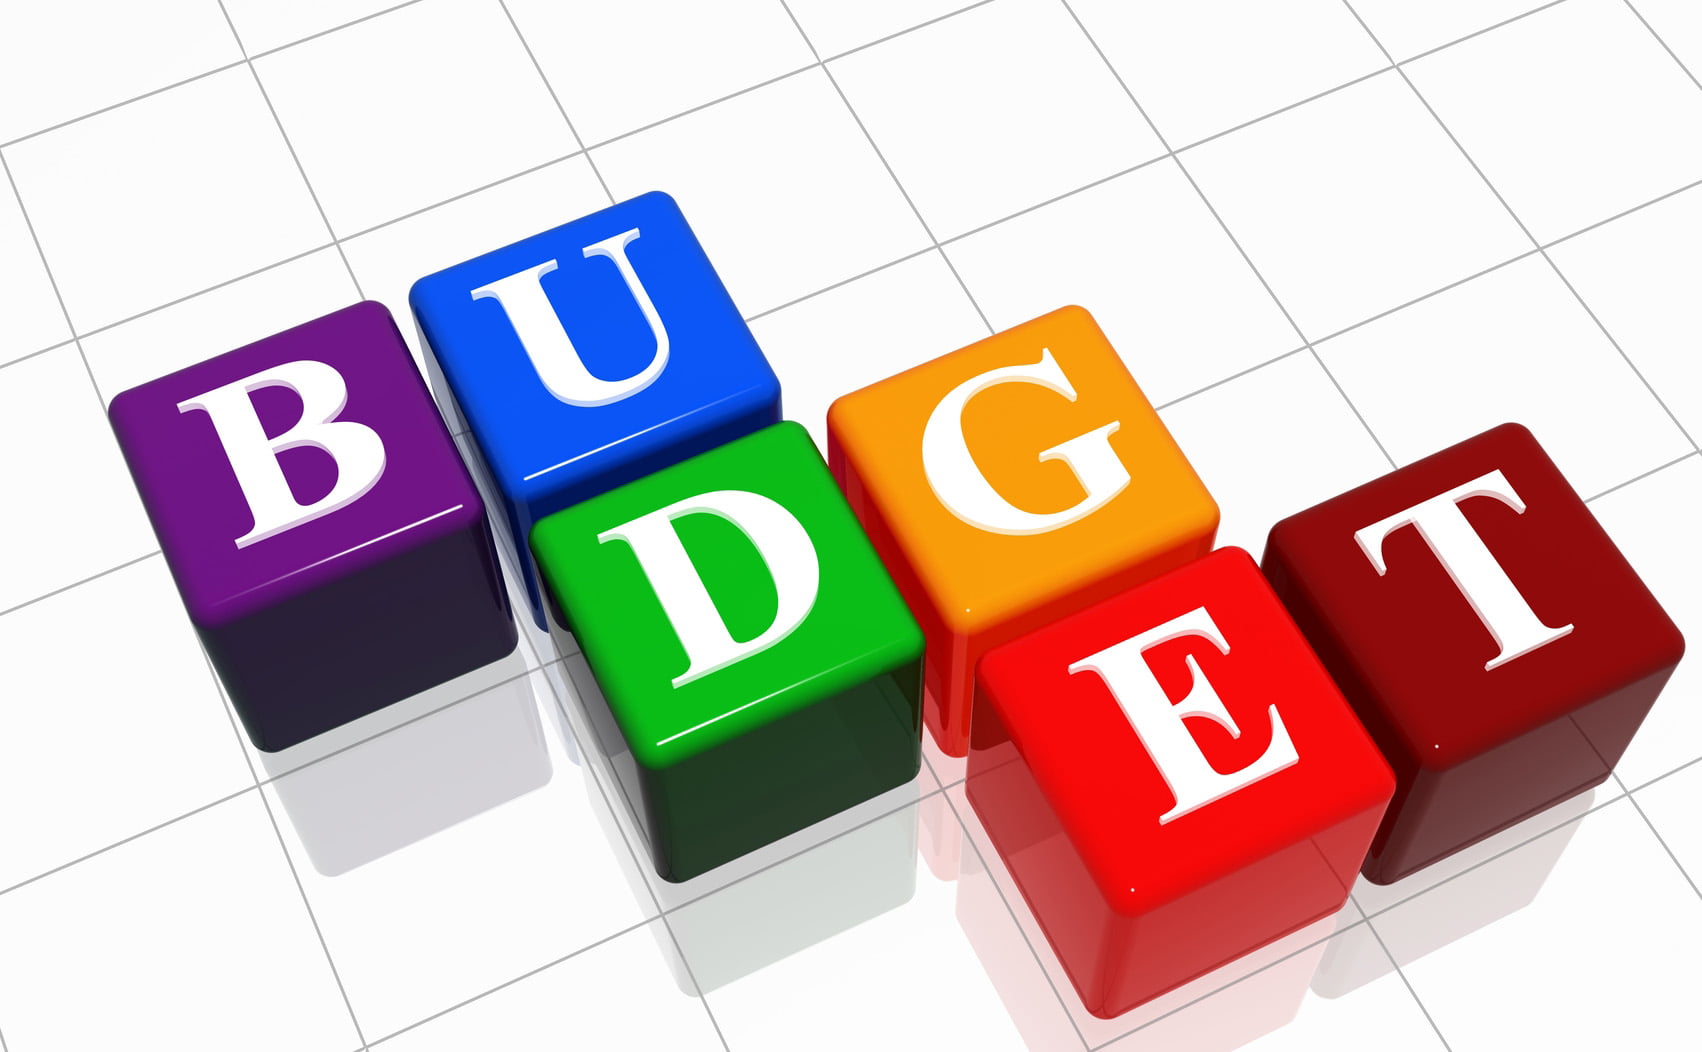 What To Expect From Odisha Budget 2021-22